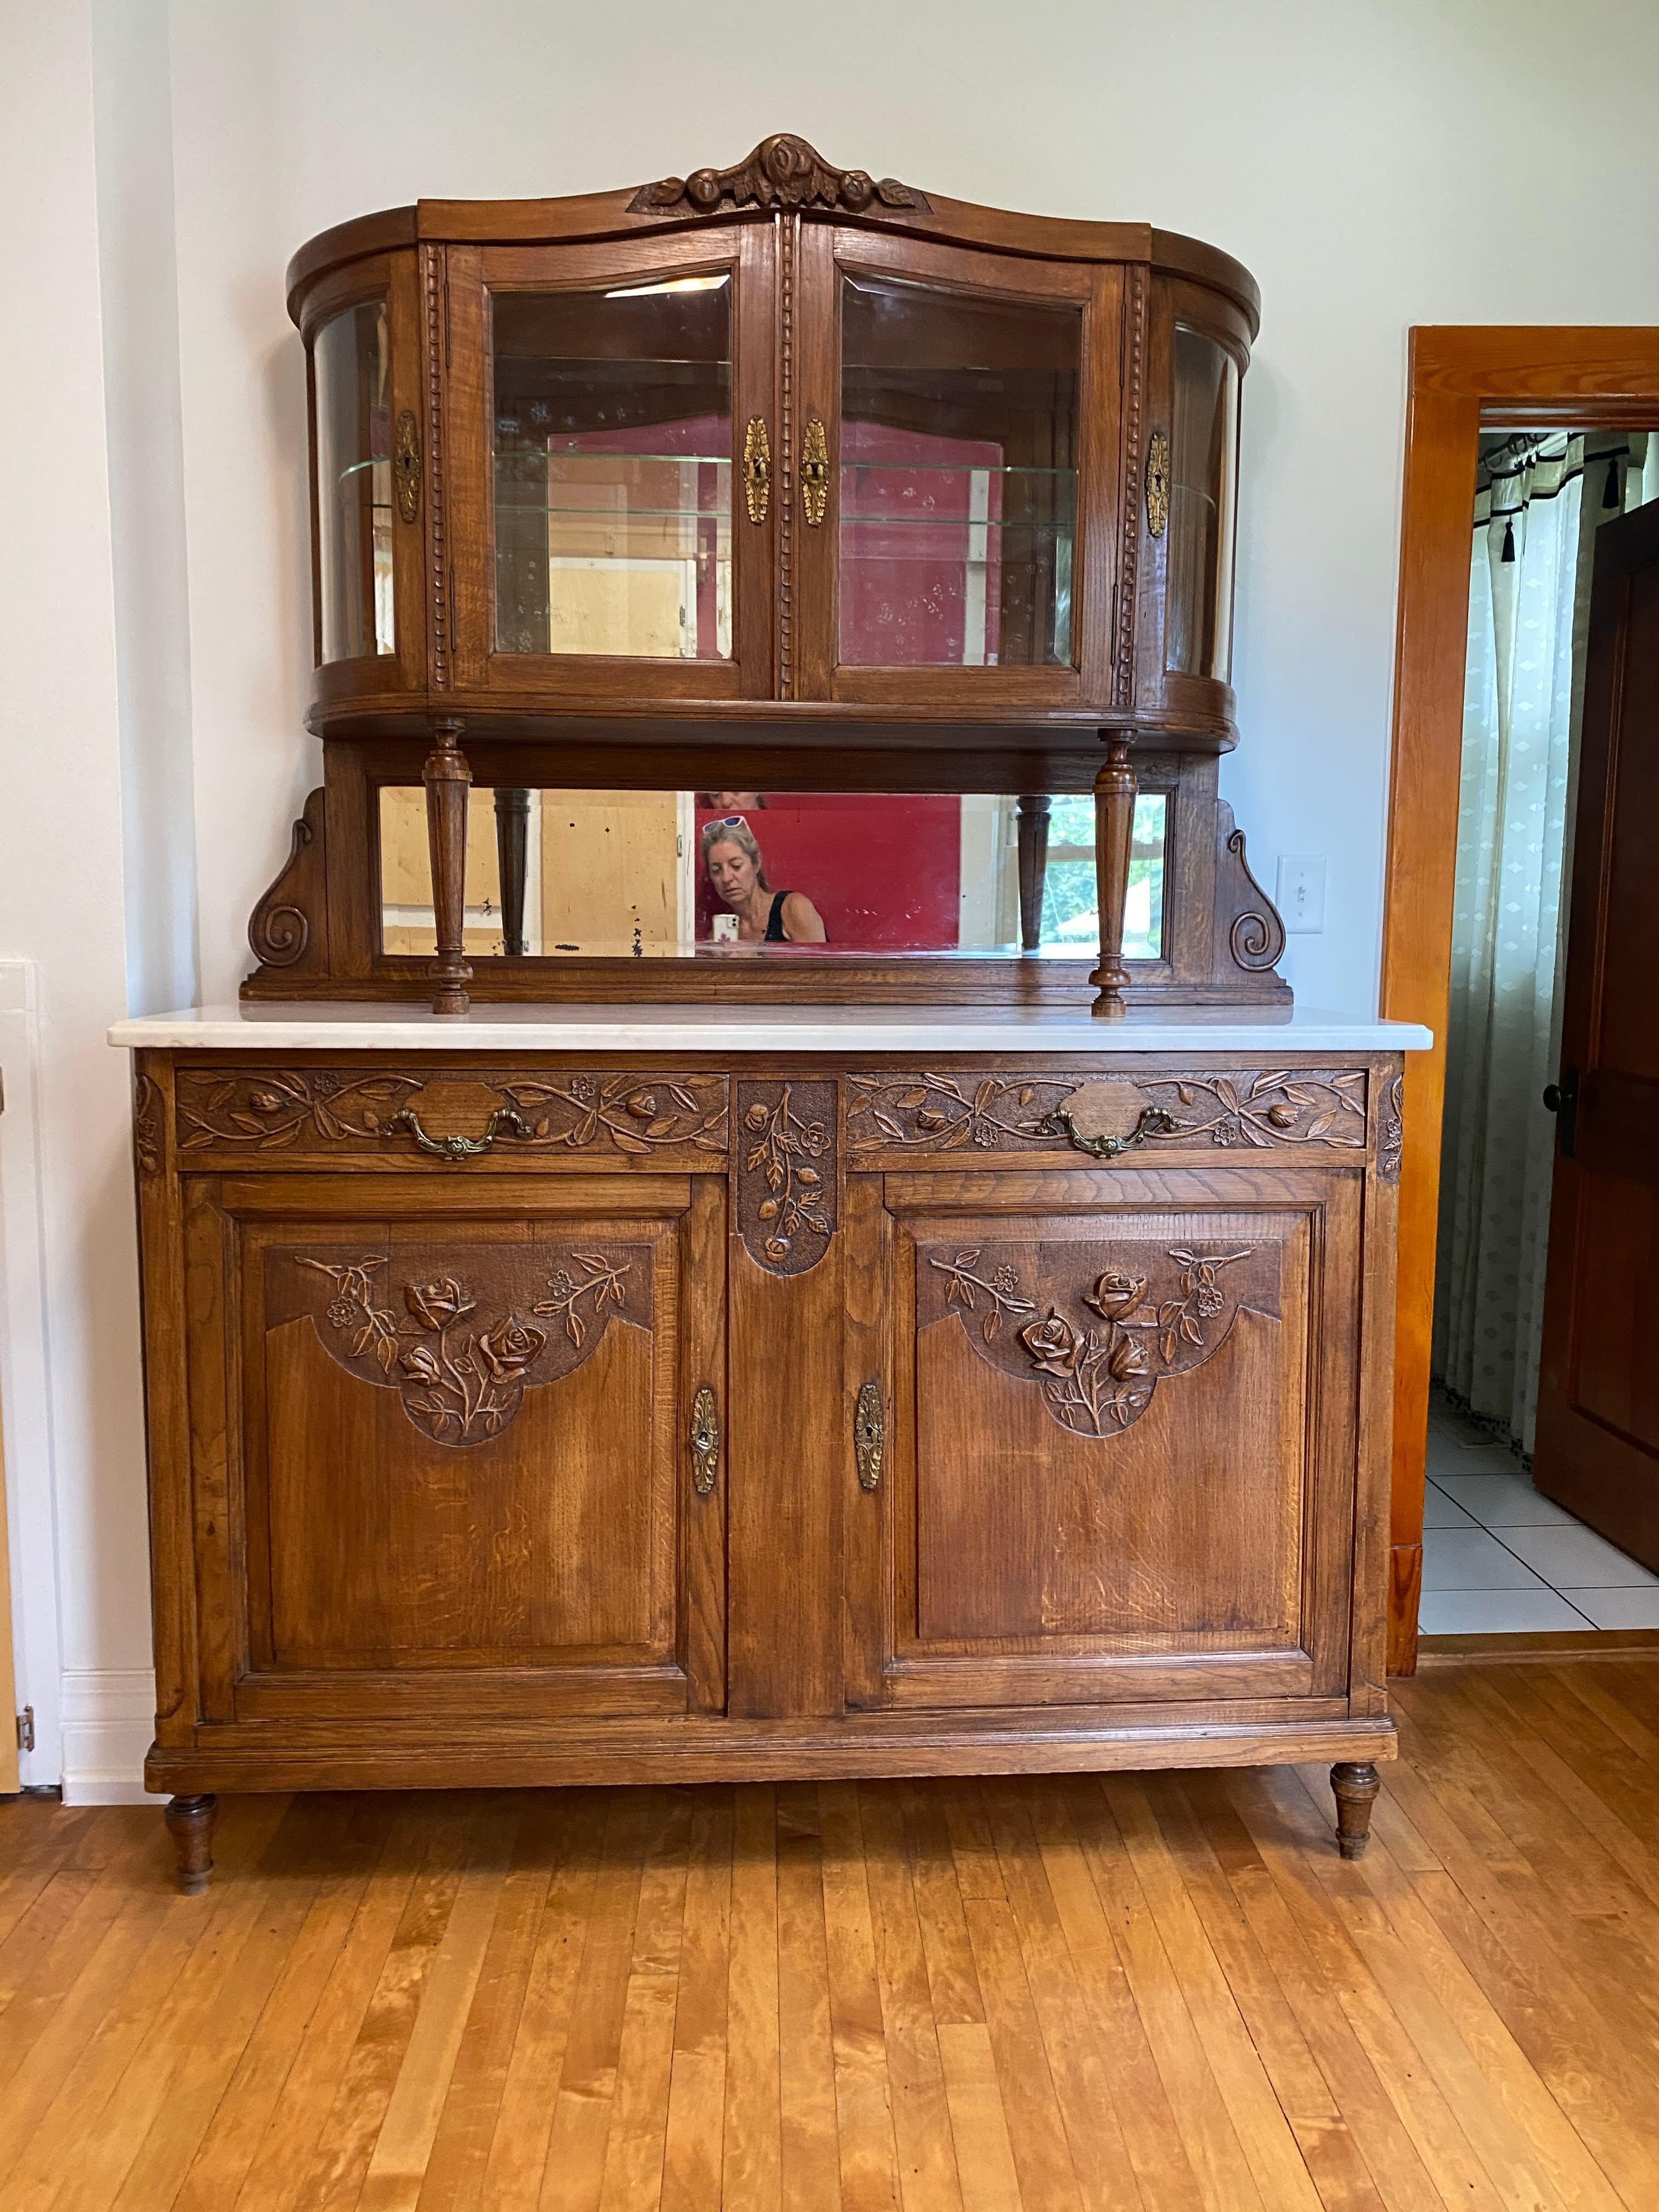 Antique French Marble Top Server Buffet With Mirror Back Display Cabinet. Cabinet, made of oak. features a rectangular bottom portion, richly carved, with 2 locking doors and 1 shelf, with 2 drawers above. The marble was replaced in France over 20